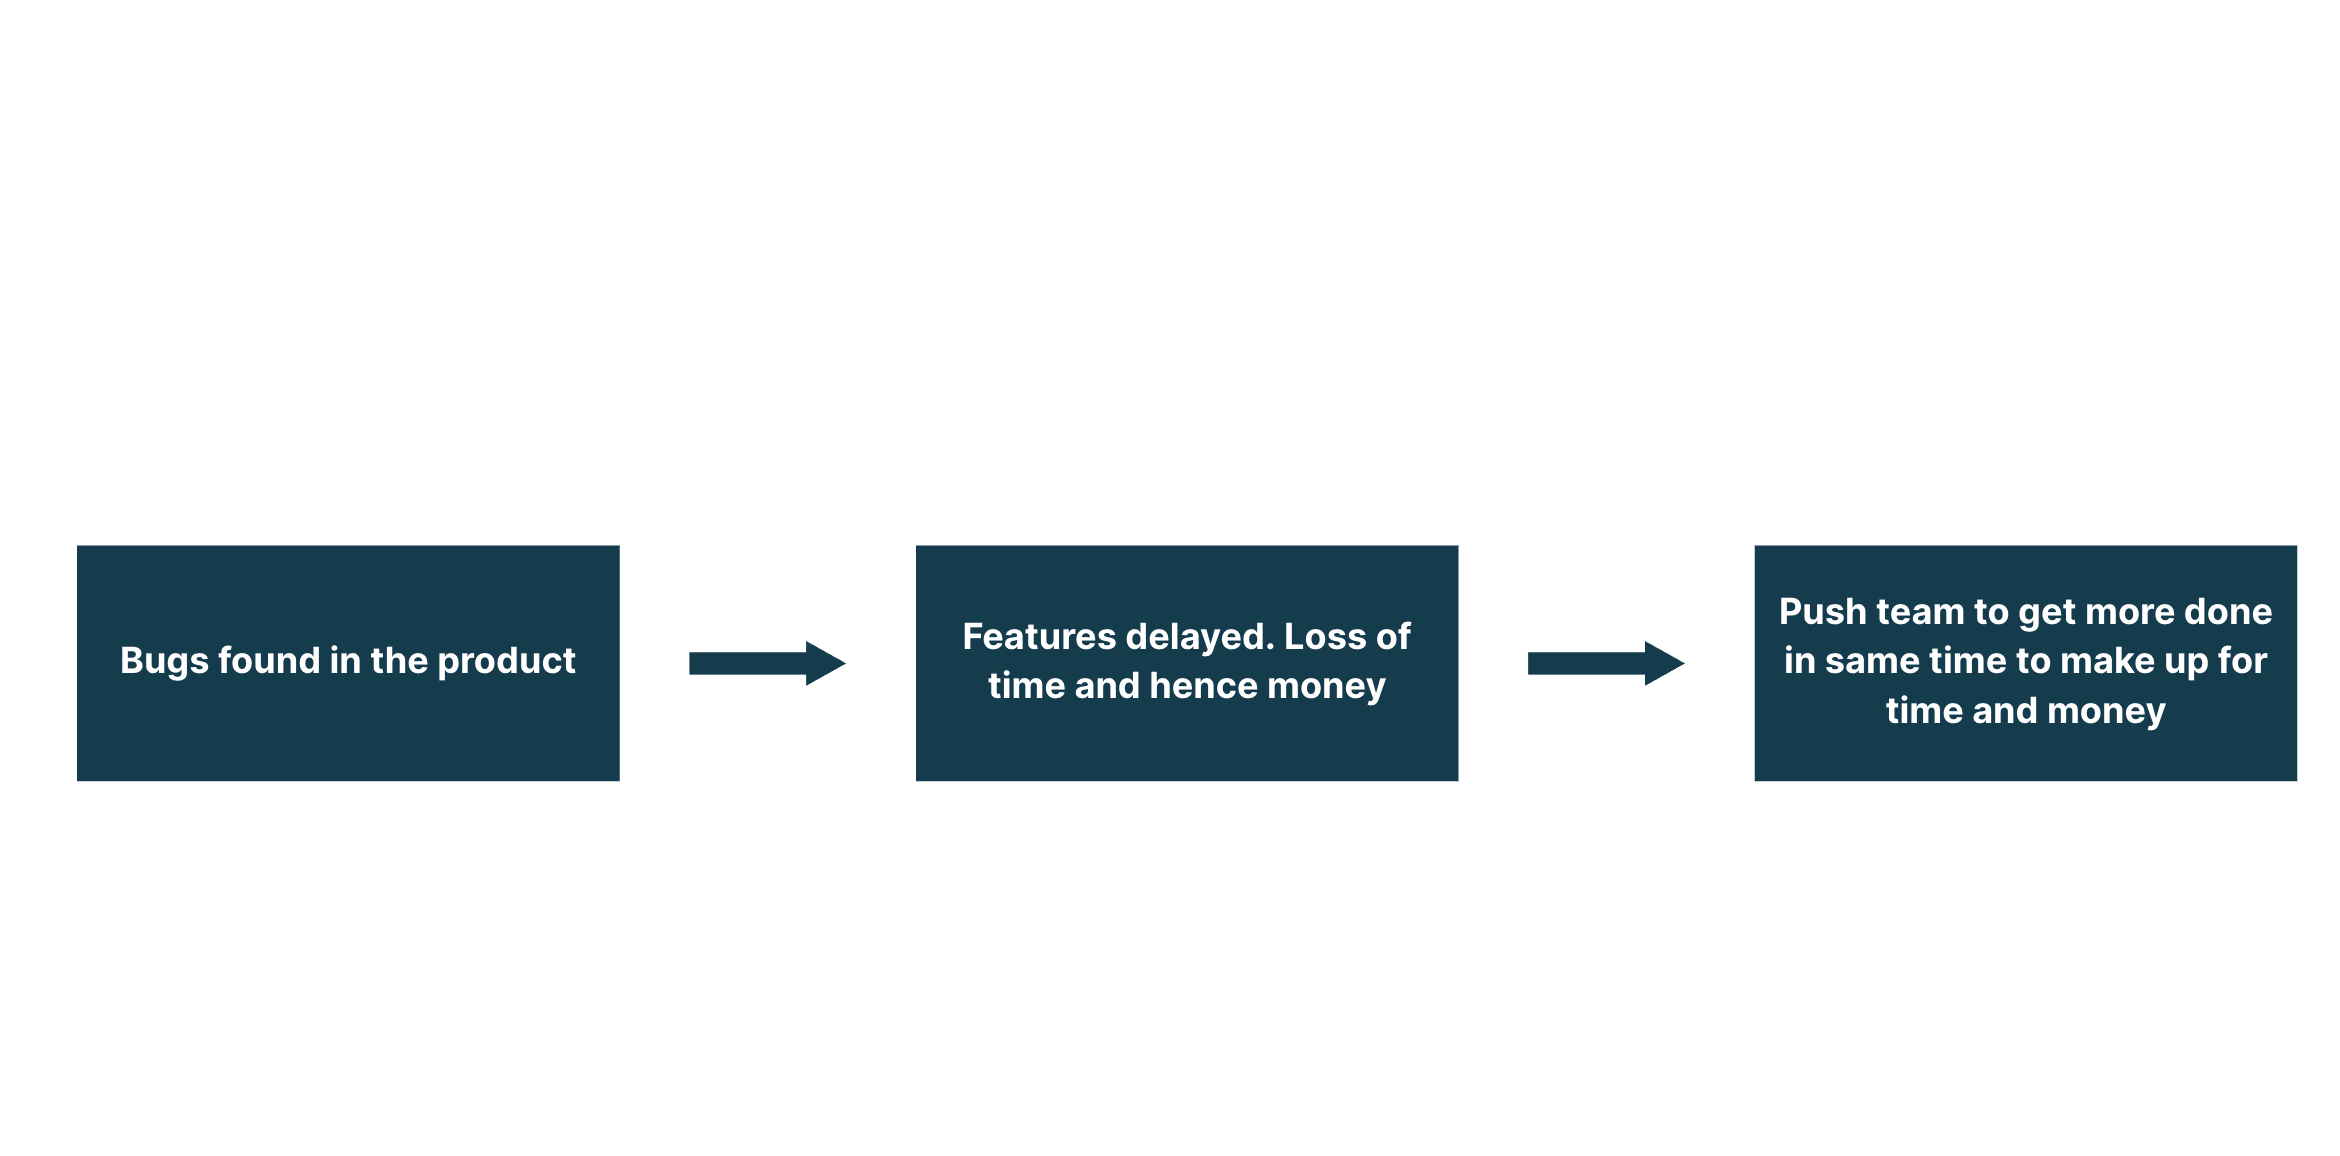 Three-part flow chart. First part says 'Bugs found in the product' to 'Features delayed. Loss of time and hence money' to 'Push team to get more done in same time to make up for time and money'